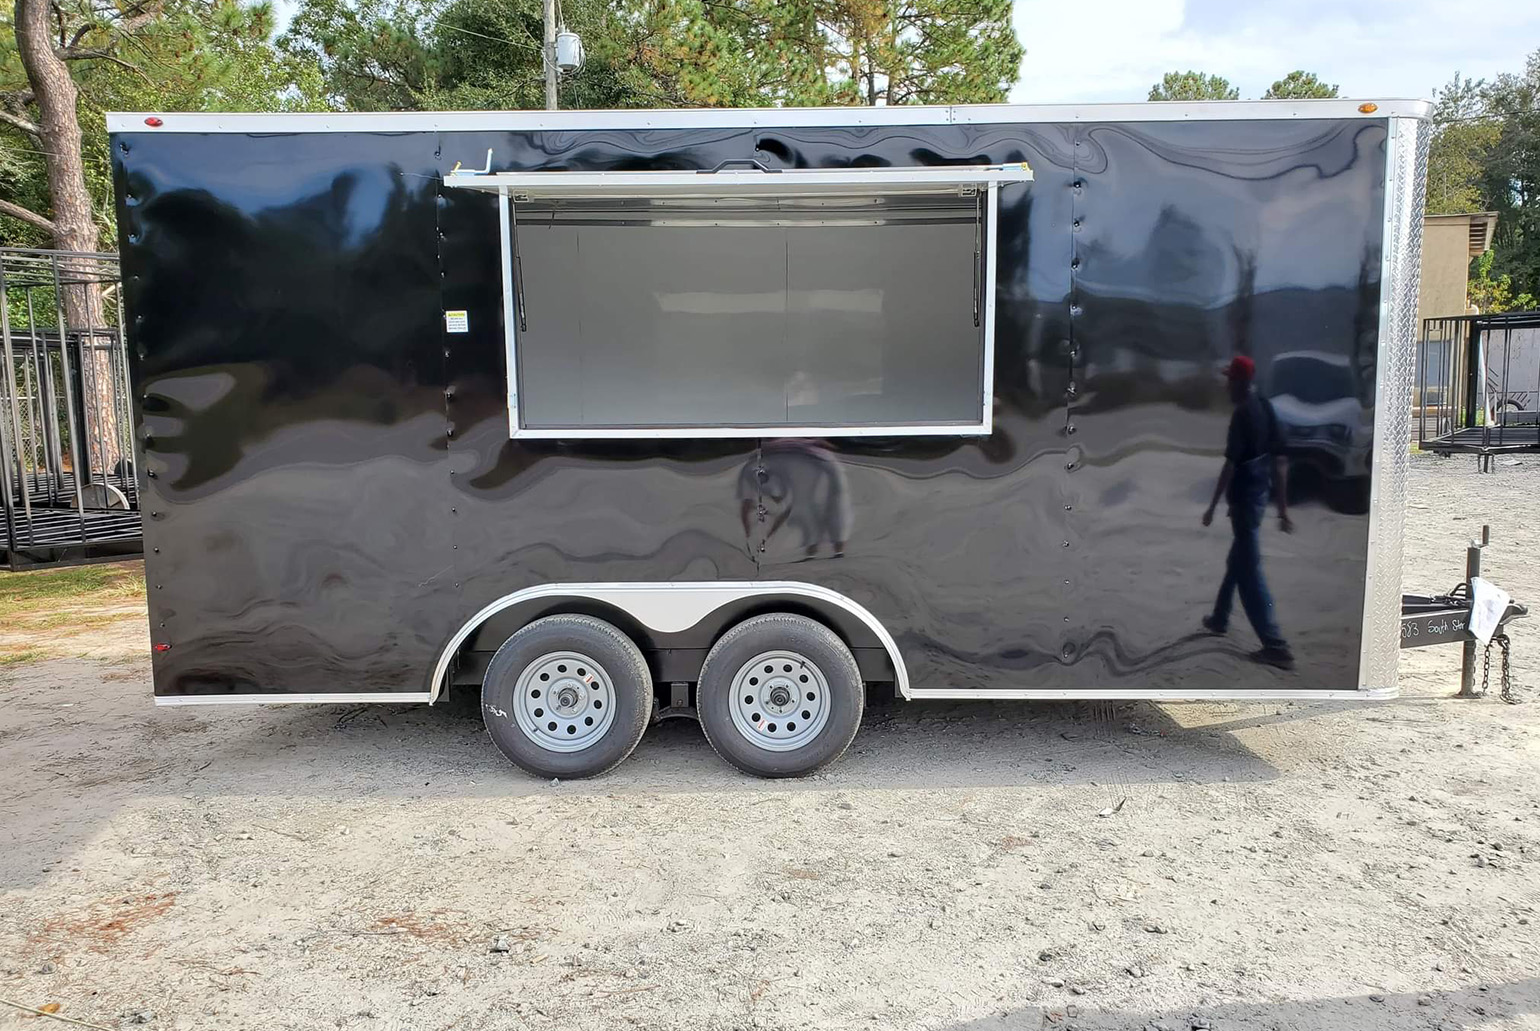 The image shows a black food truck parked on a paved surface, with a person visible in the background.